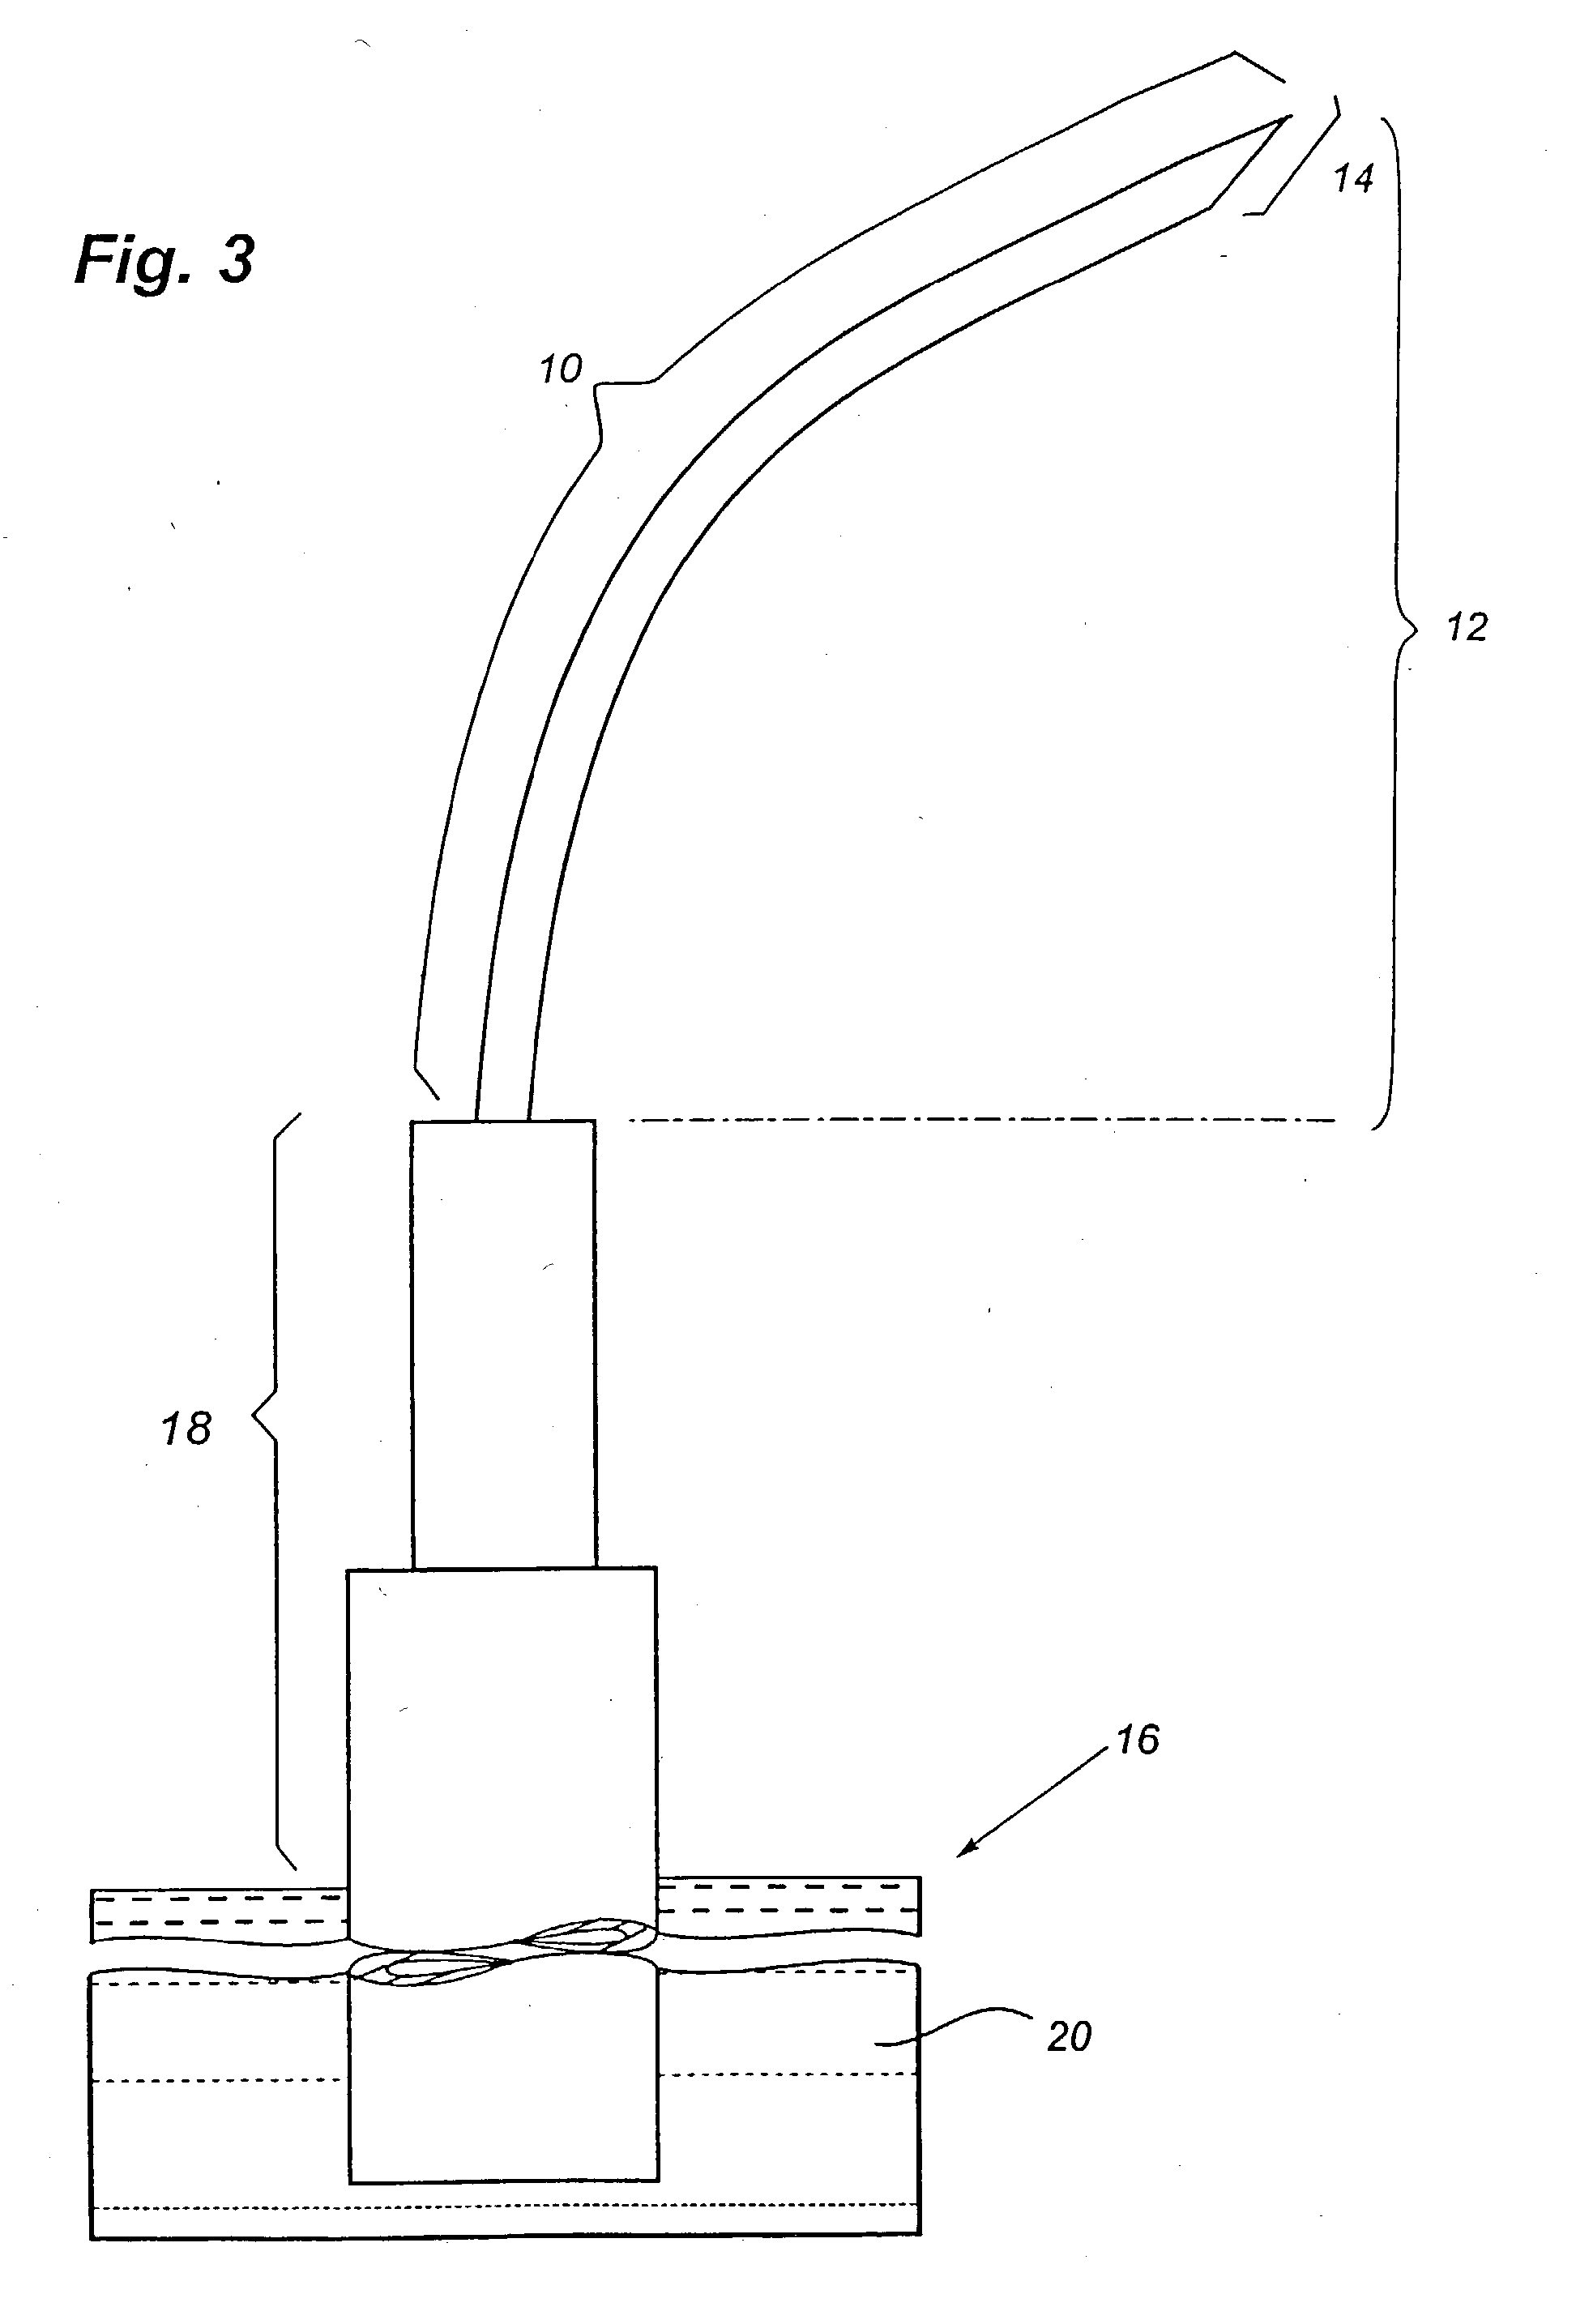 Apparatus for performing surgery inside the human retina using fluidic internal limiting membrane (ILM) separation (FILMS)